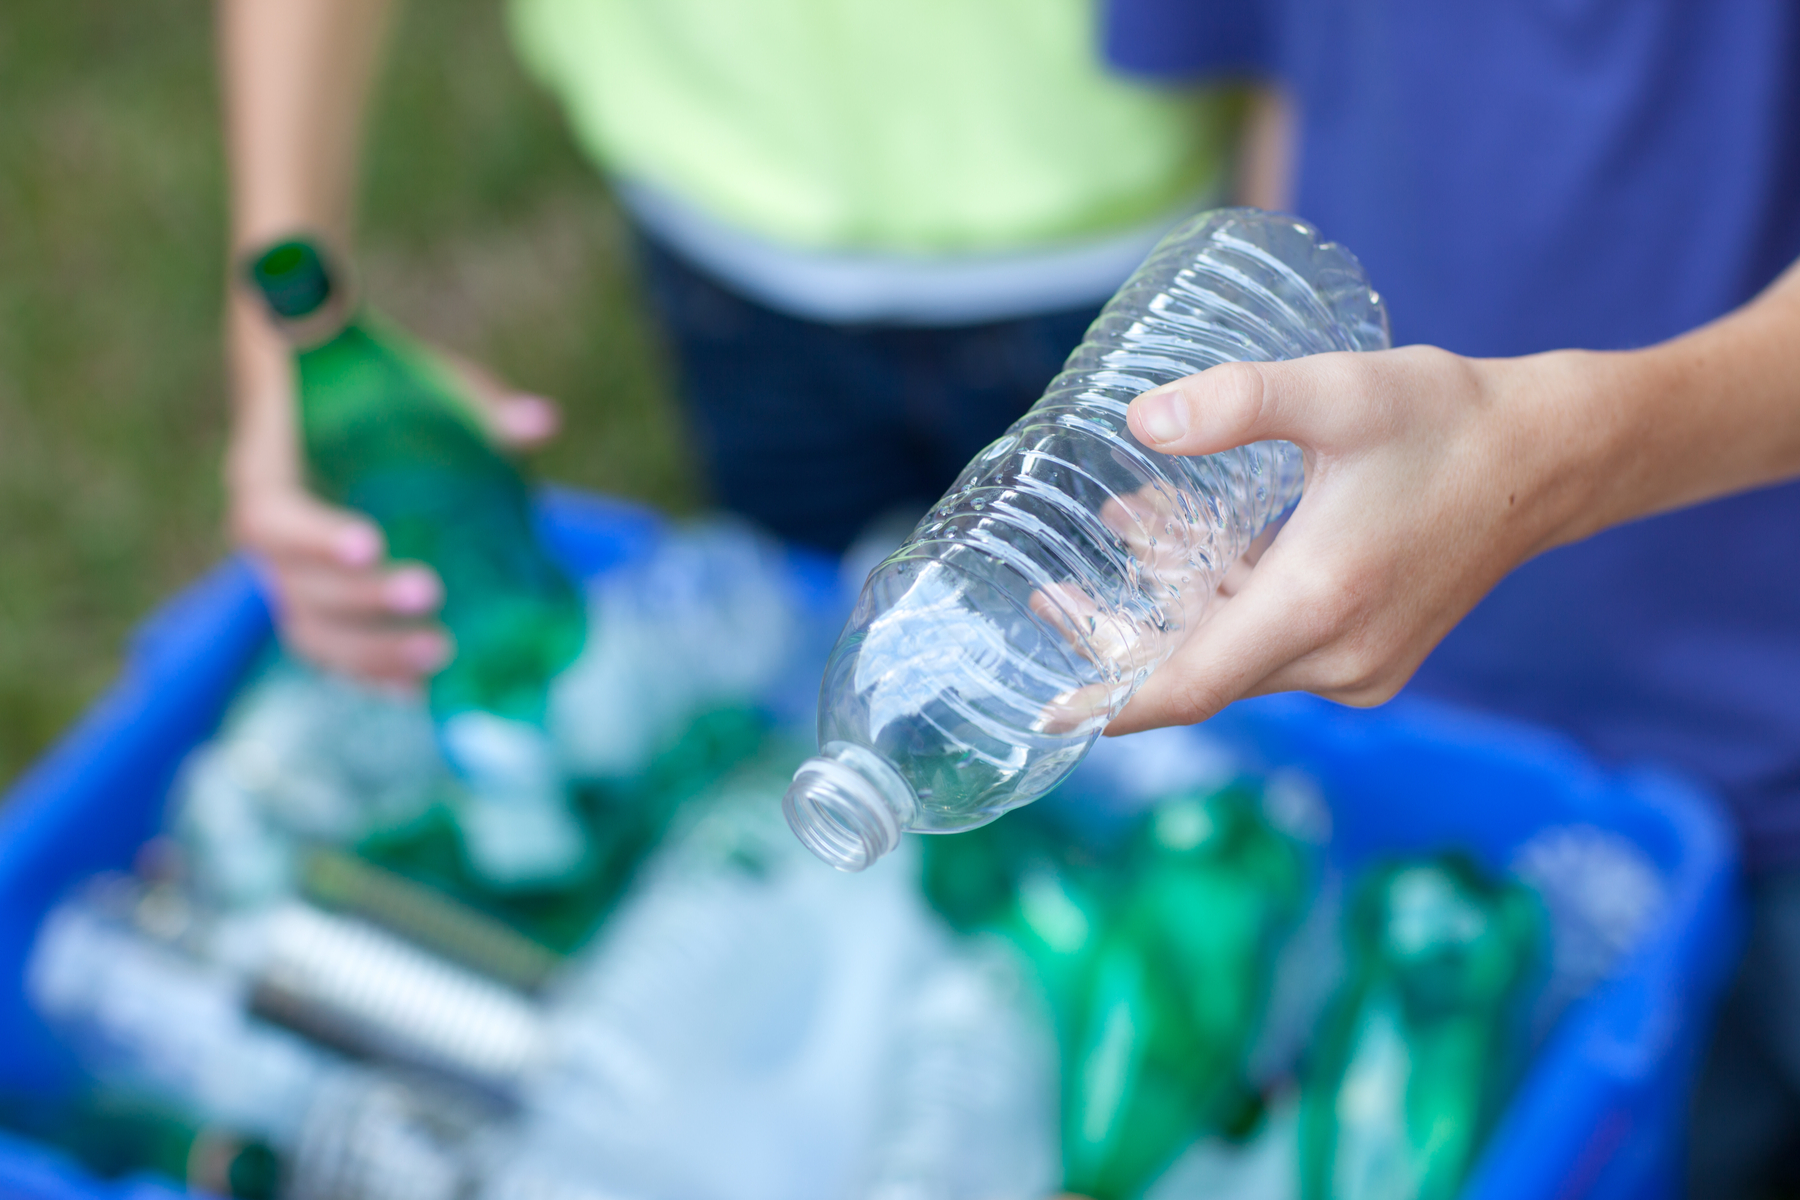 5 simple yet powerful changes to make your business eco-friendlier for Global Recycling Day